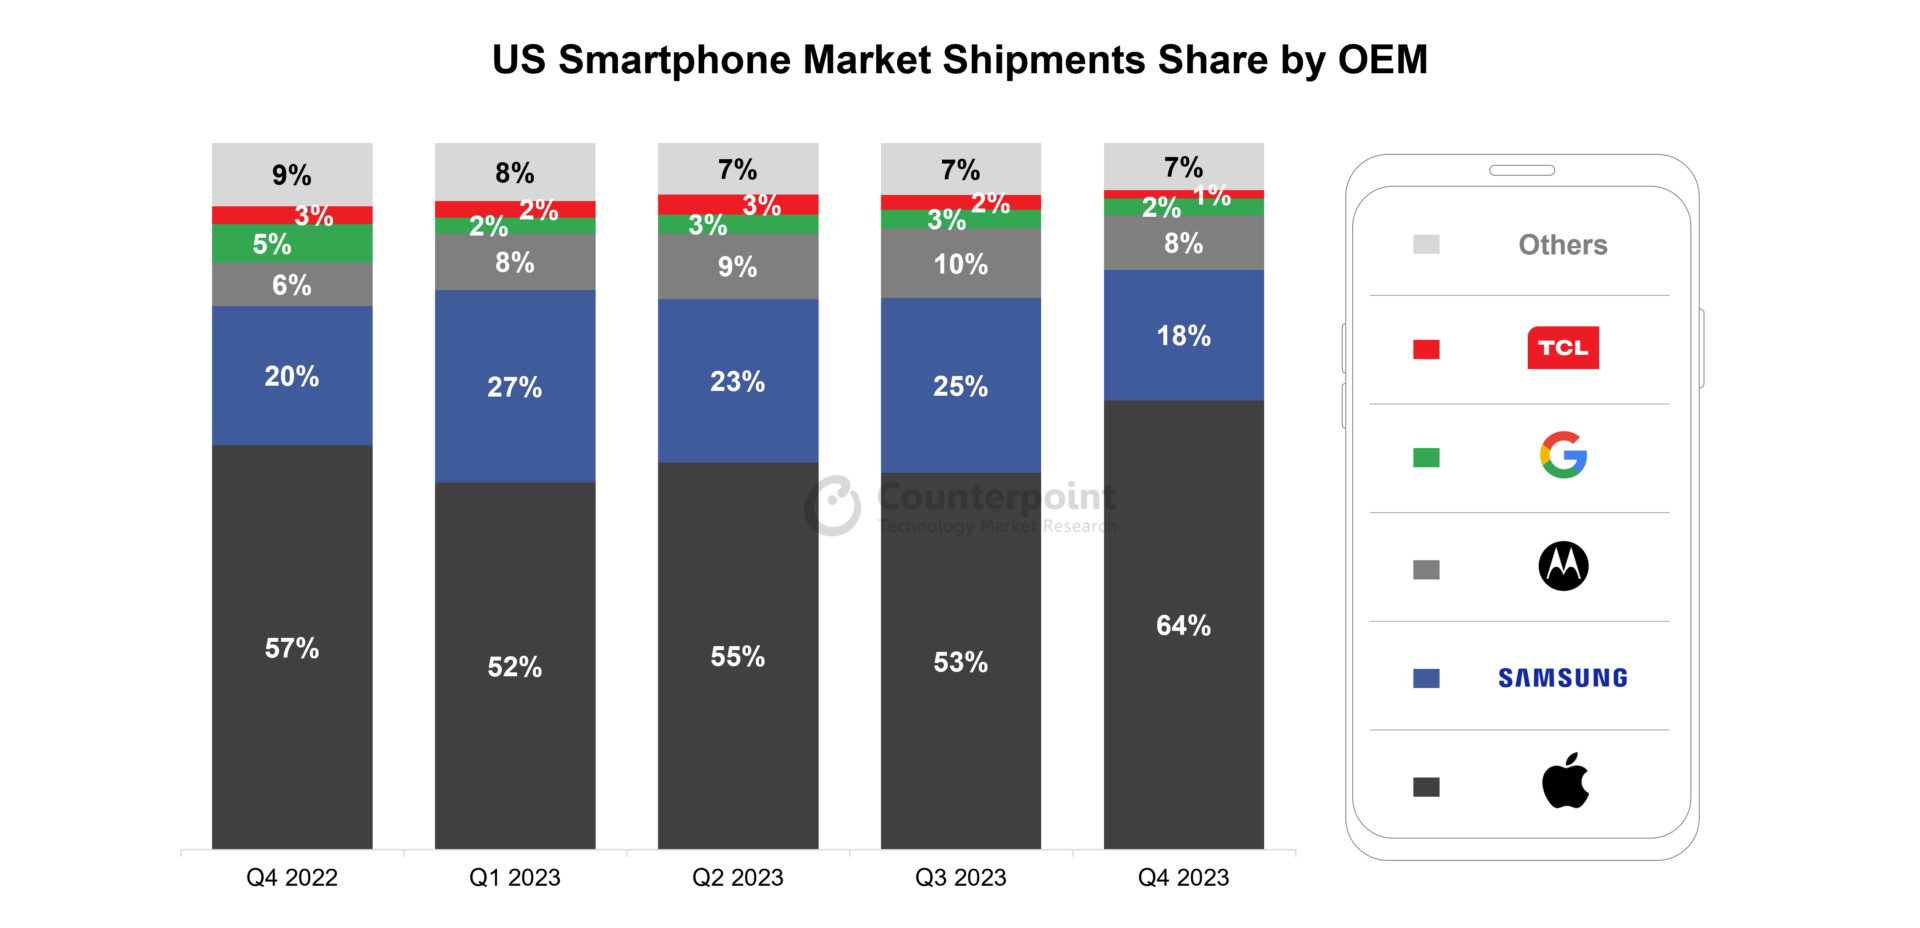 US-Smartphone-Market-Shipments-Share-by-OEM-e1706770492870.png